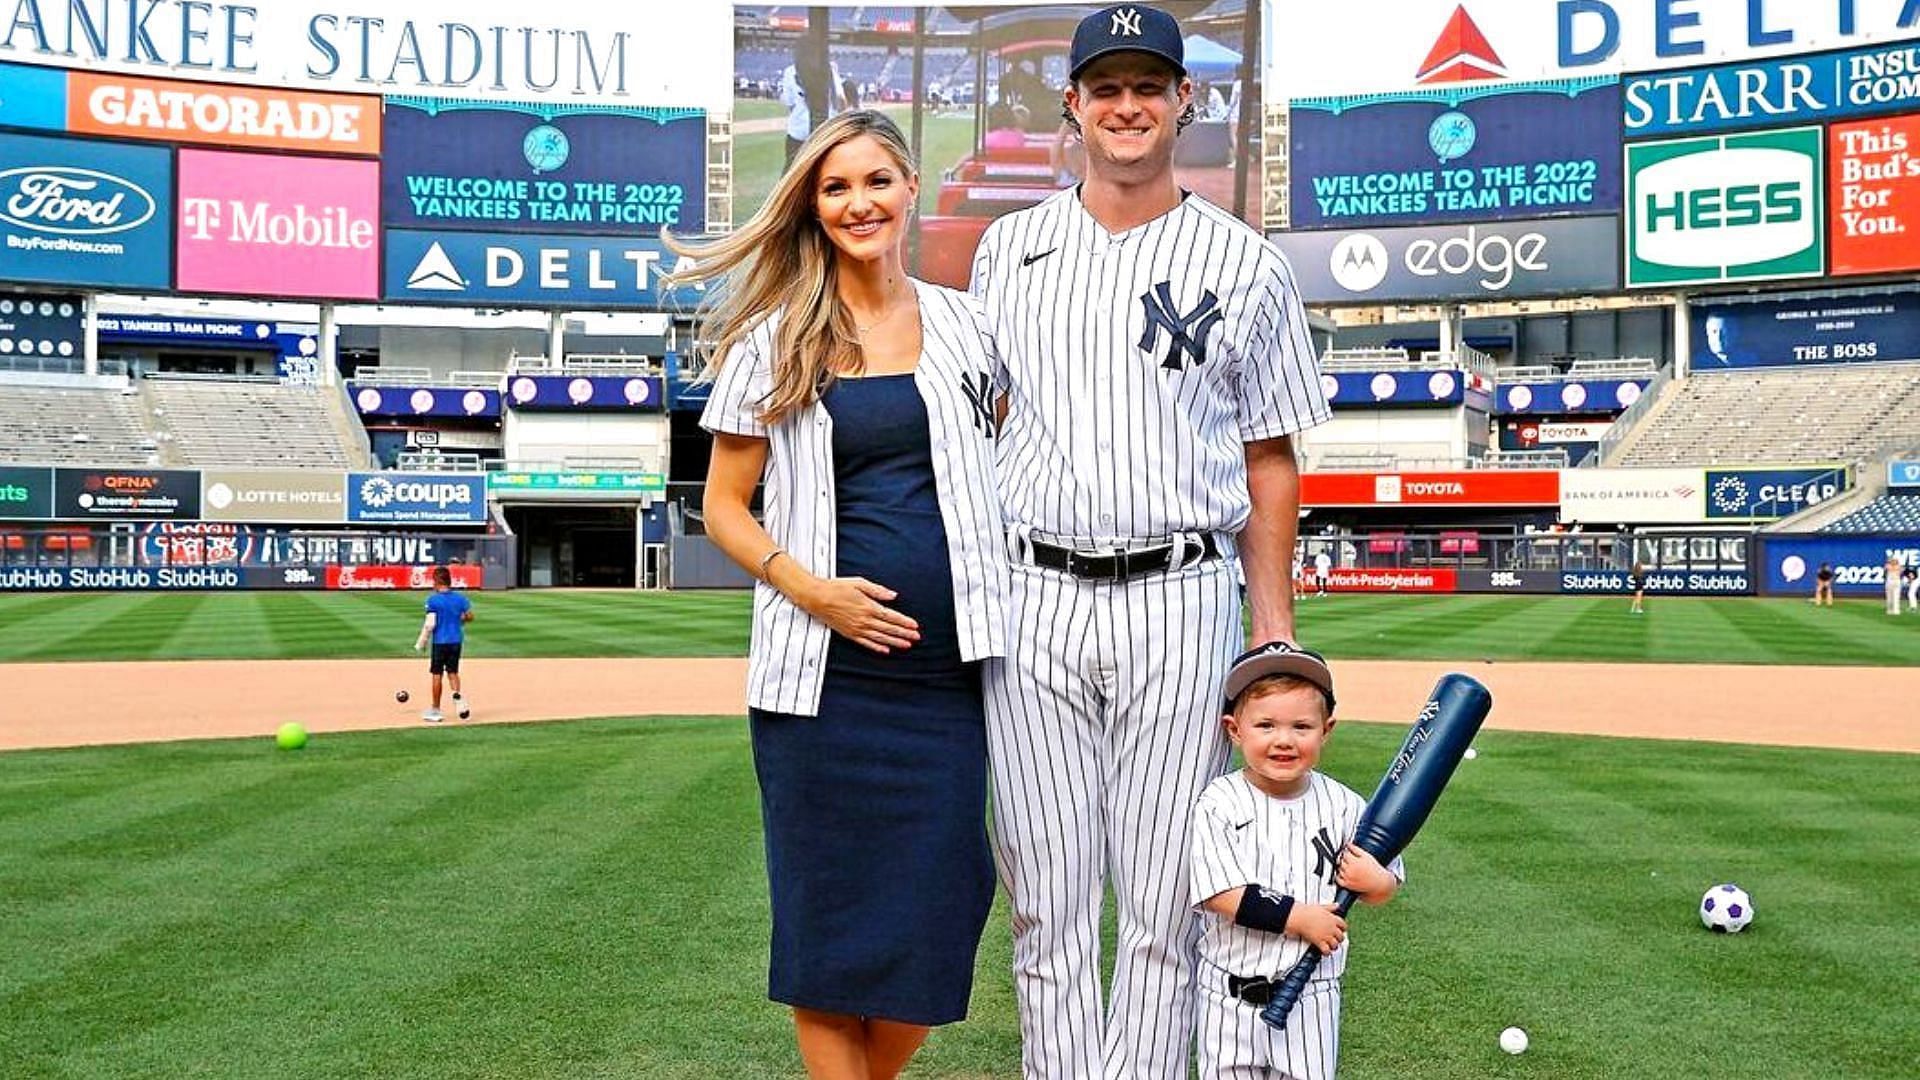 New York Yankees pitcher Gerrit Cole with his wife and son at Yankee Stadium.